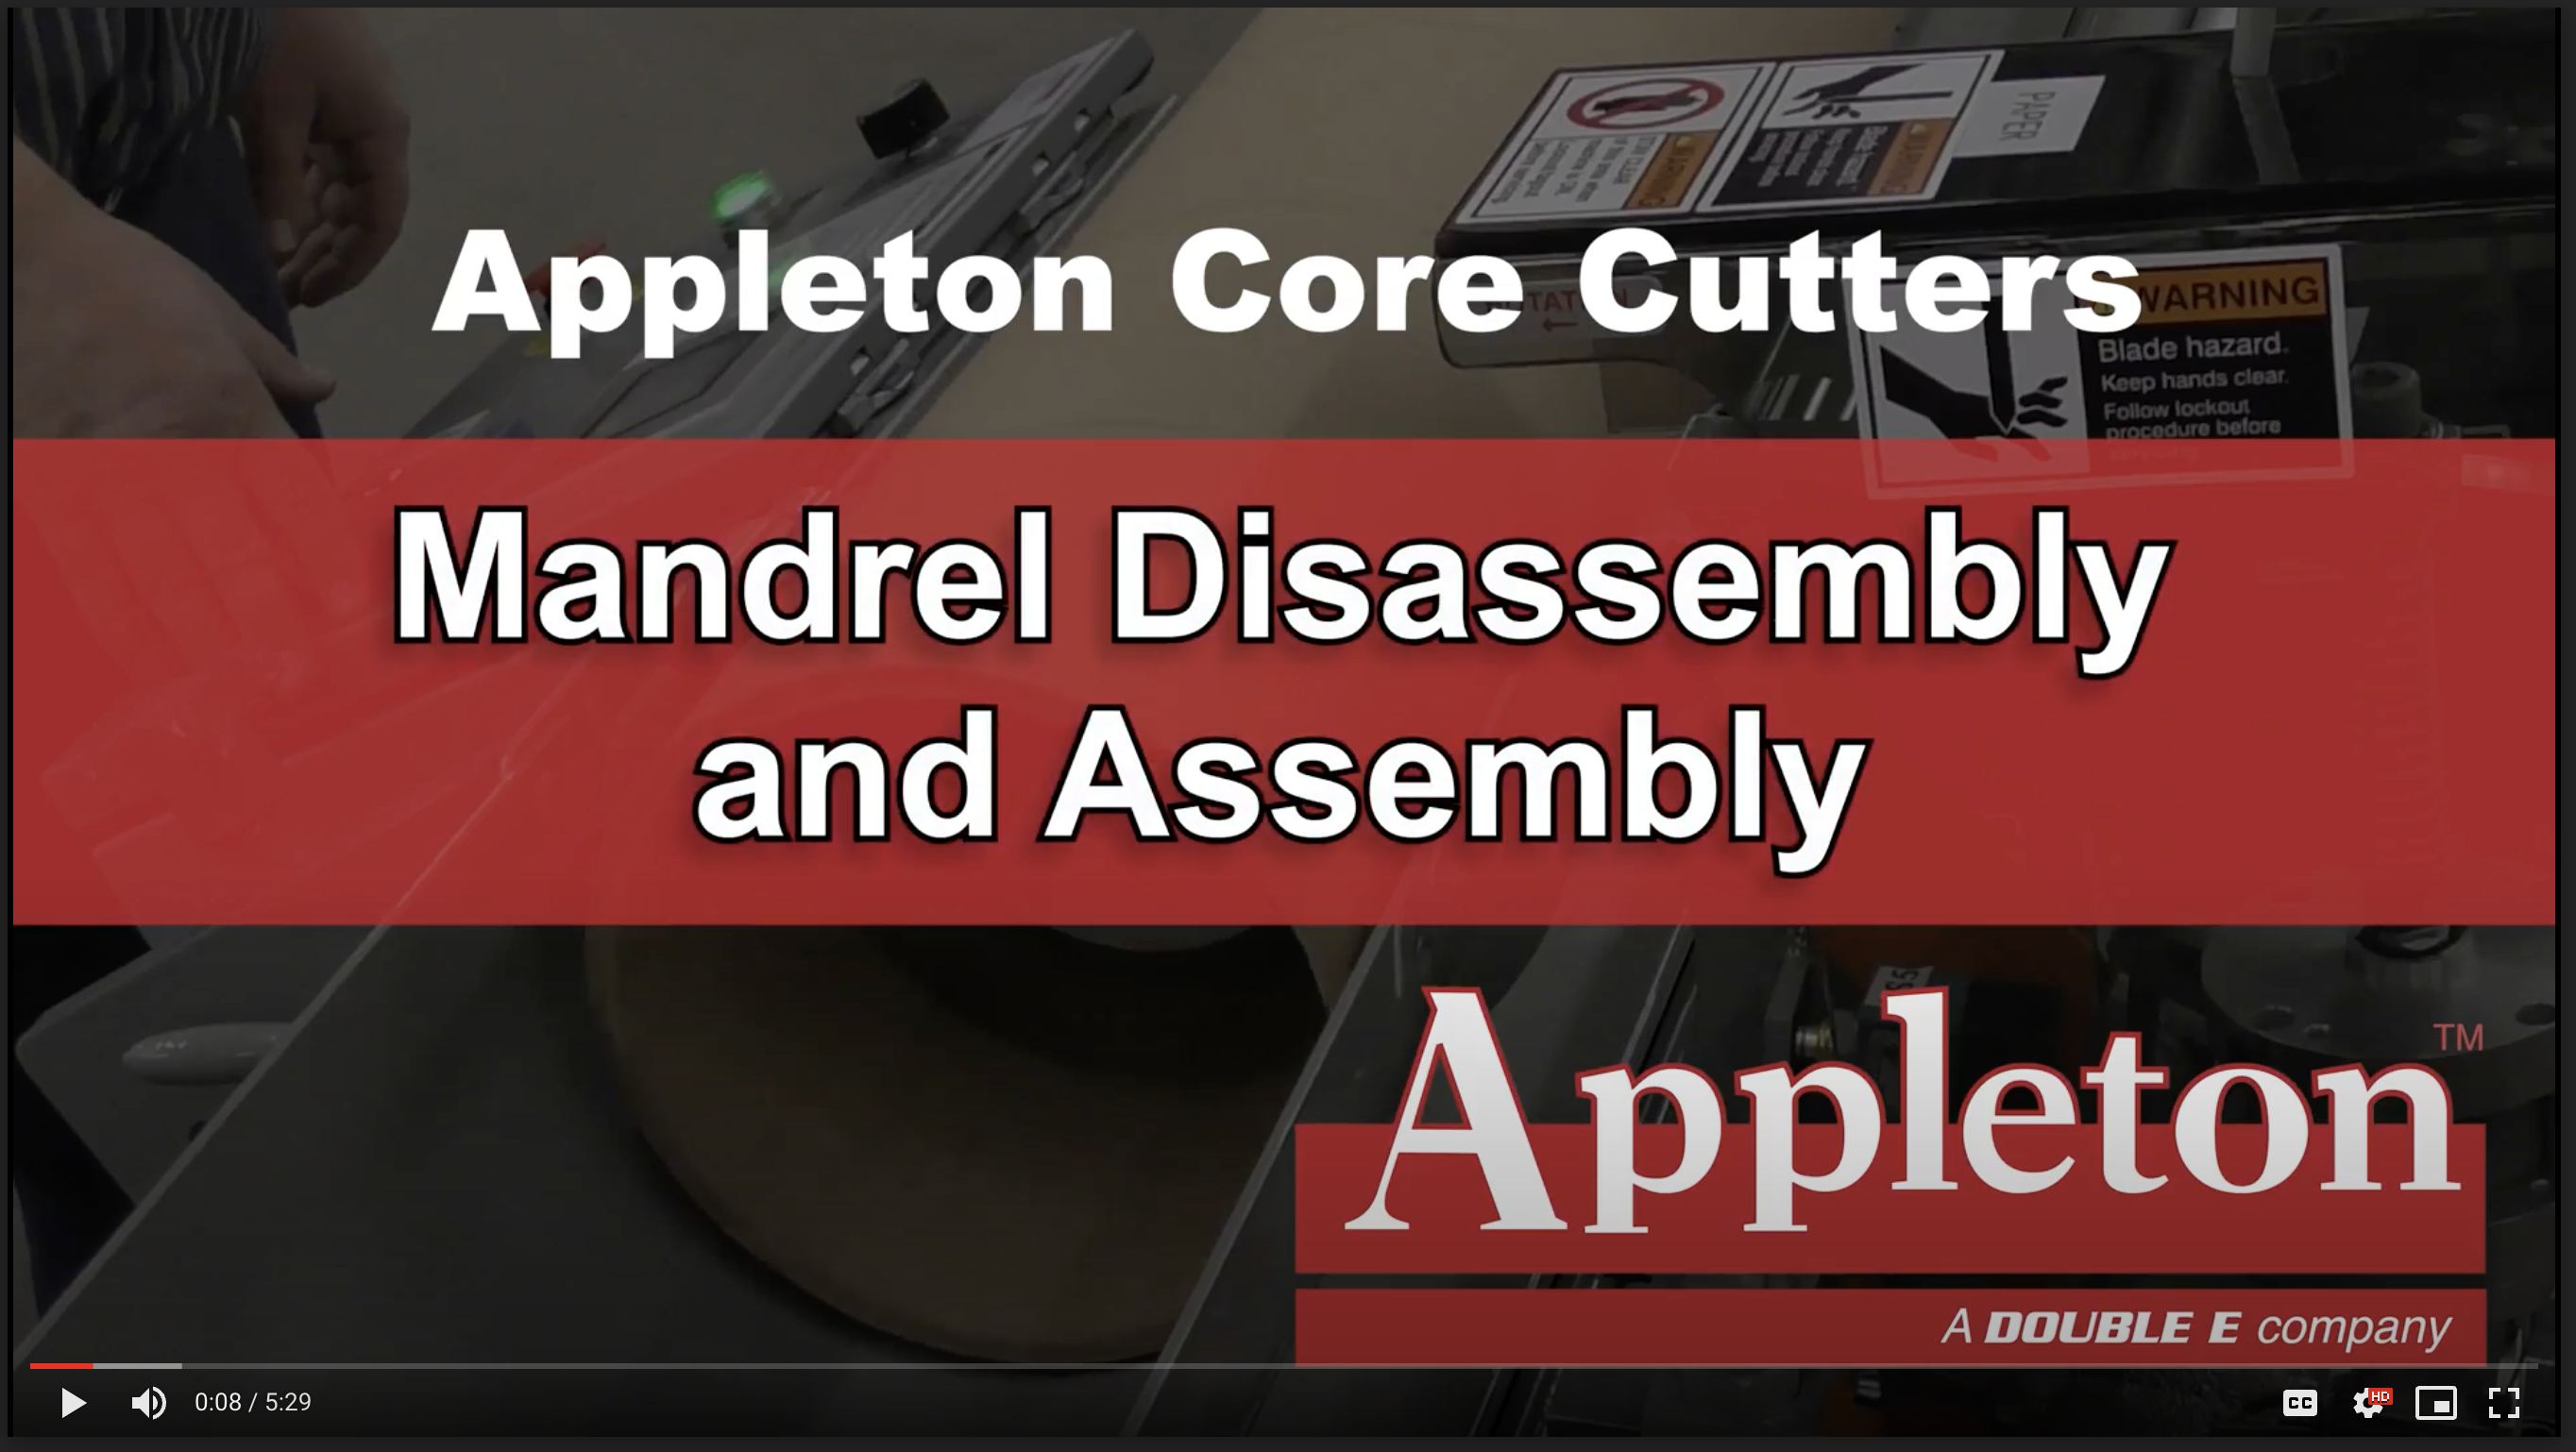 Mandrel Disassembly and Assembly